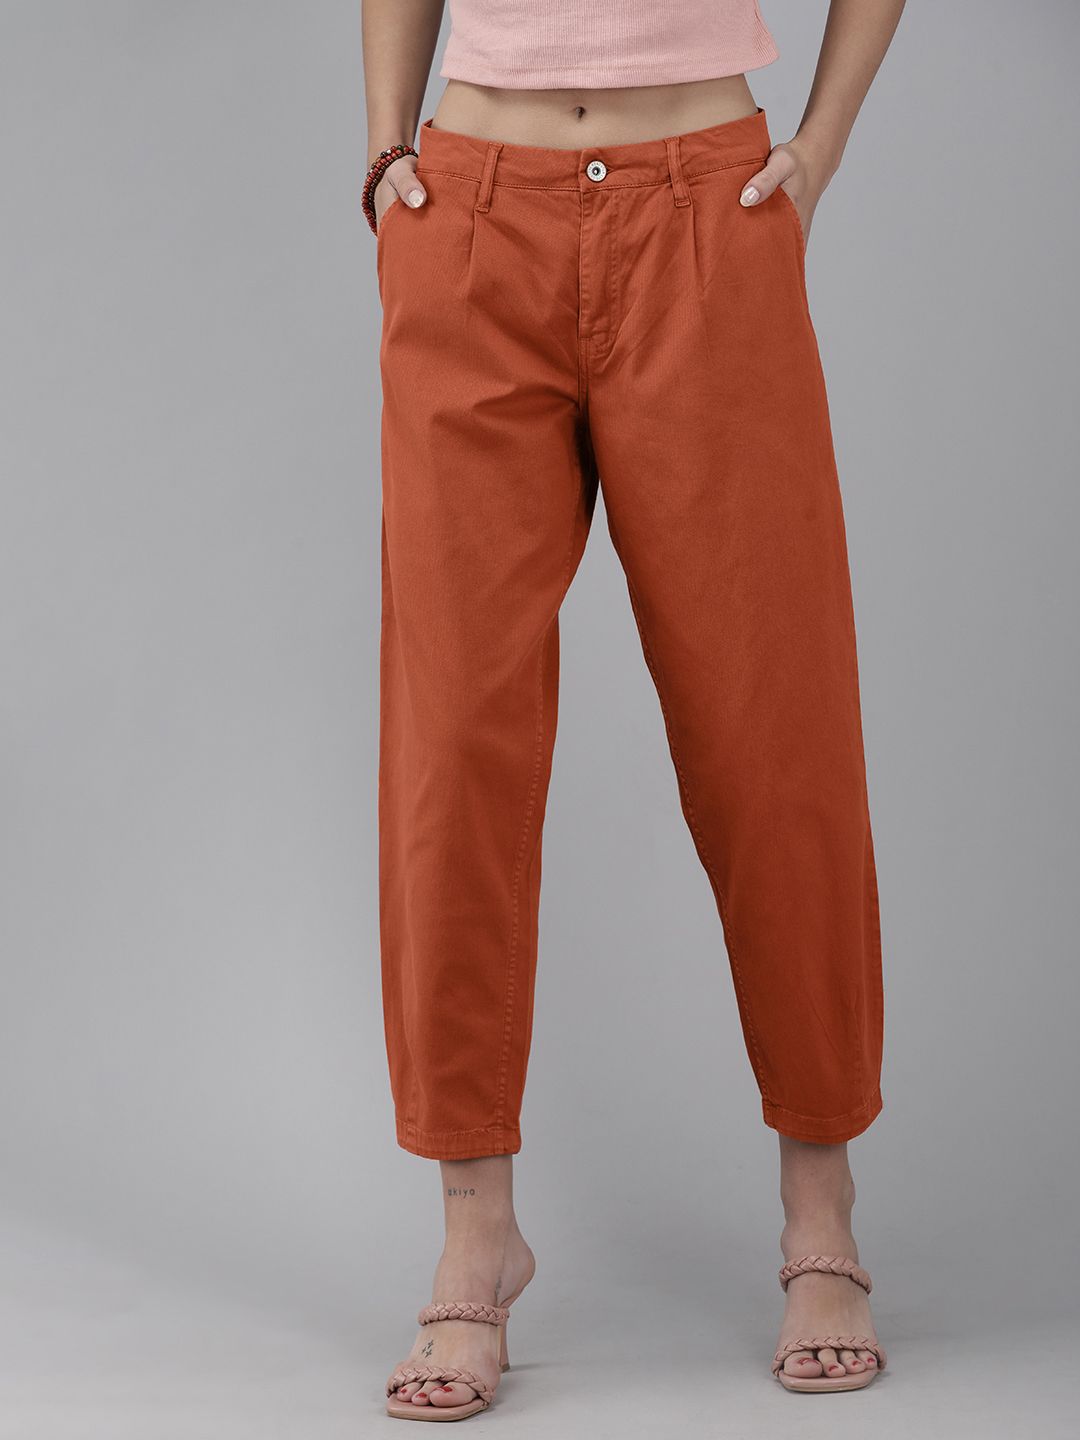 The Roadster Lifestyle Co Women Rust Orange Printed Slouchy Fit Cropped Regular Trousers Price in India